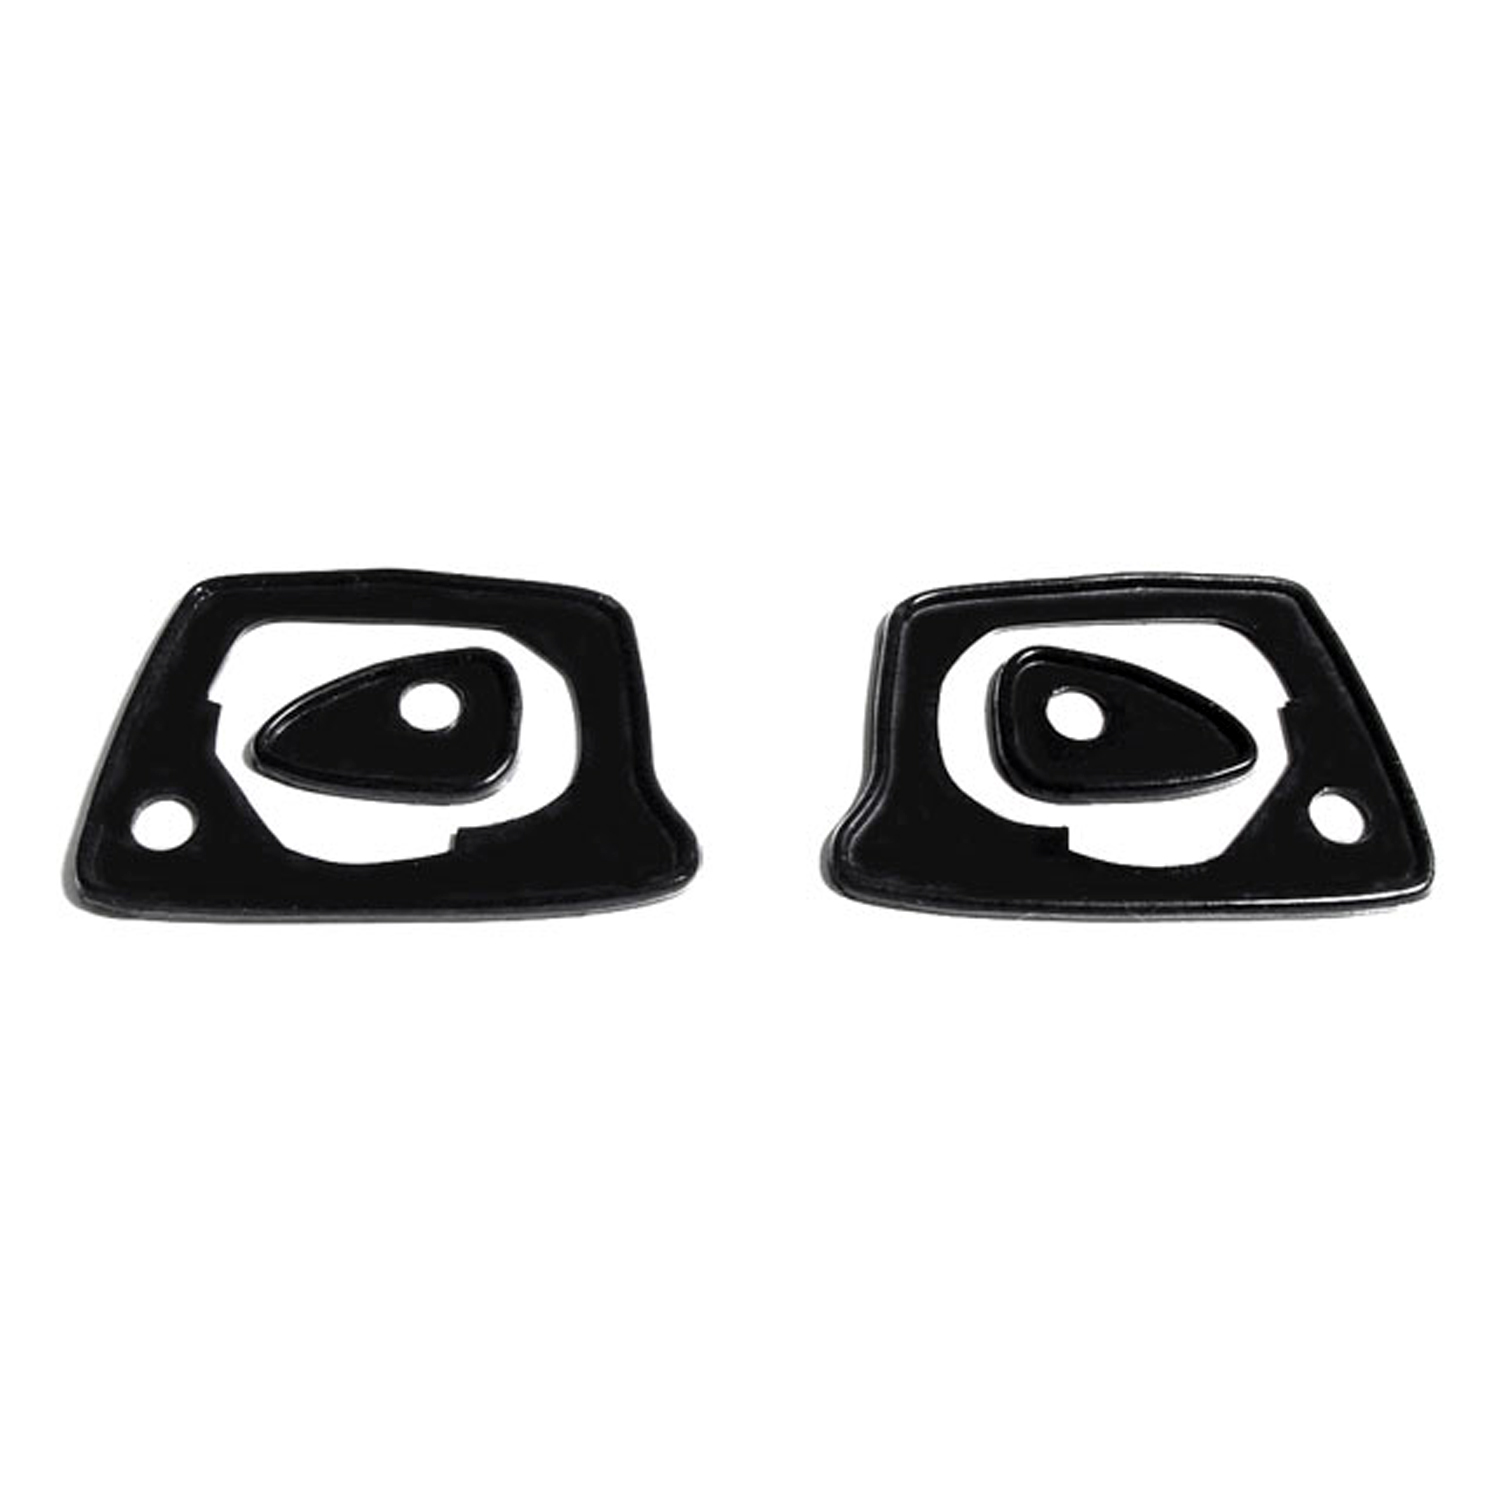 1970 Plymouth Fury I Door handle mounting pads.  2-3/8 in. L x 1-1/8 in. L-MP 959-B